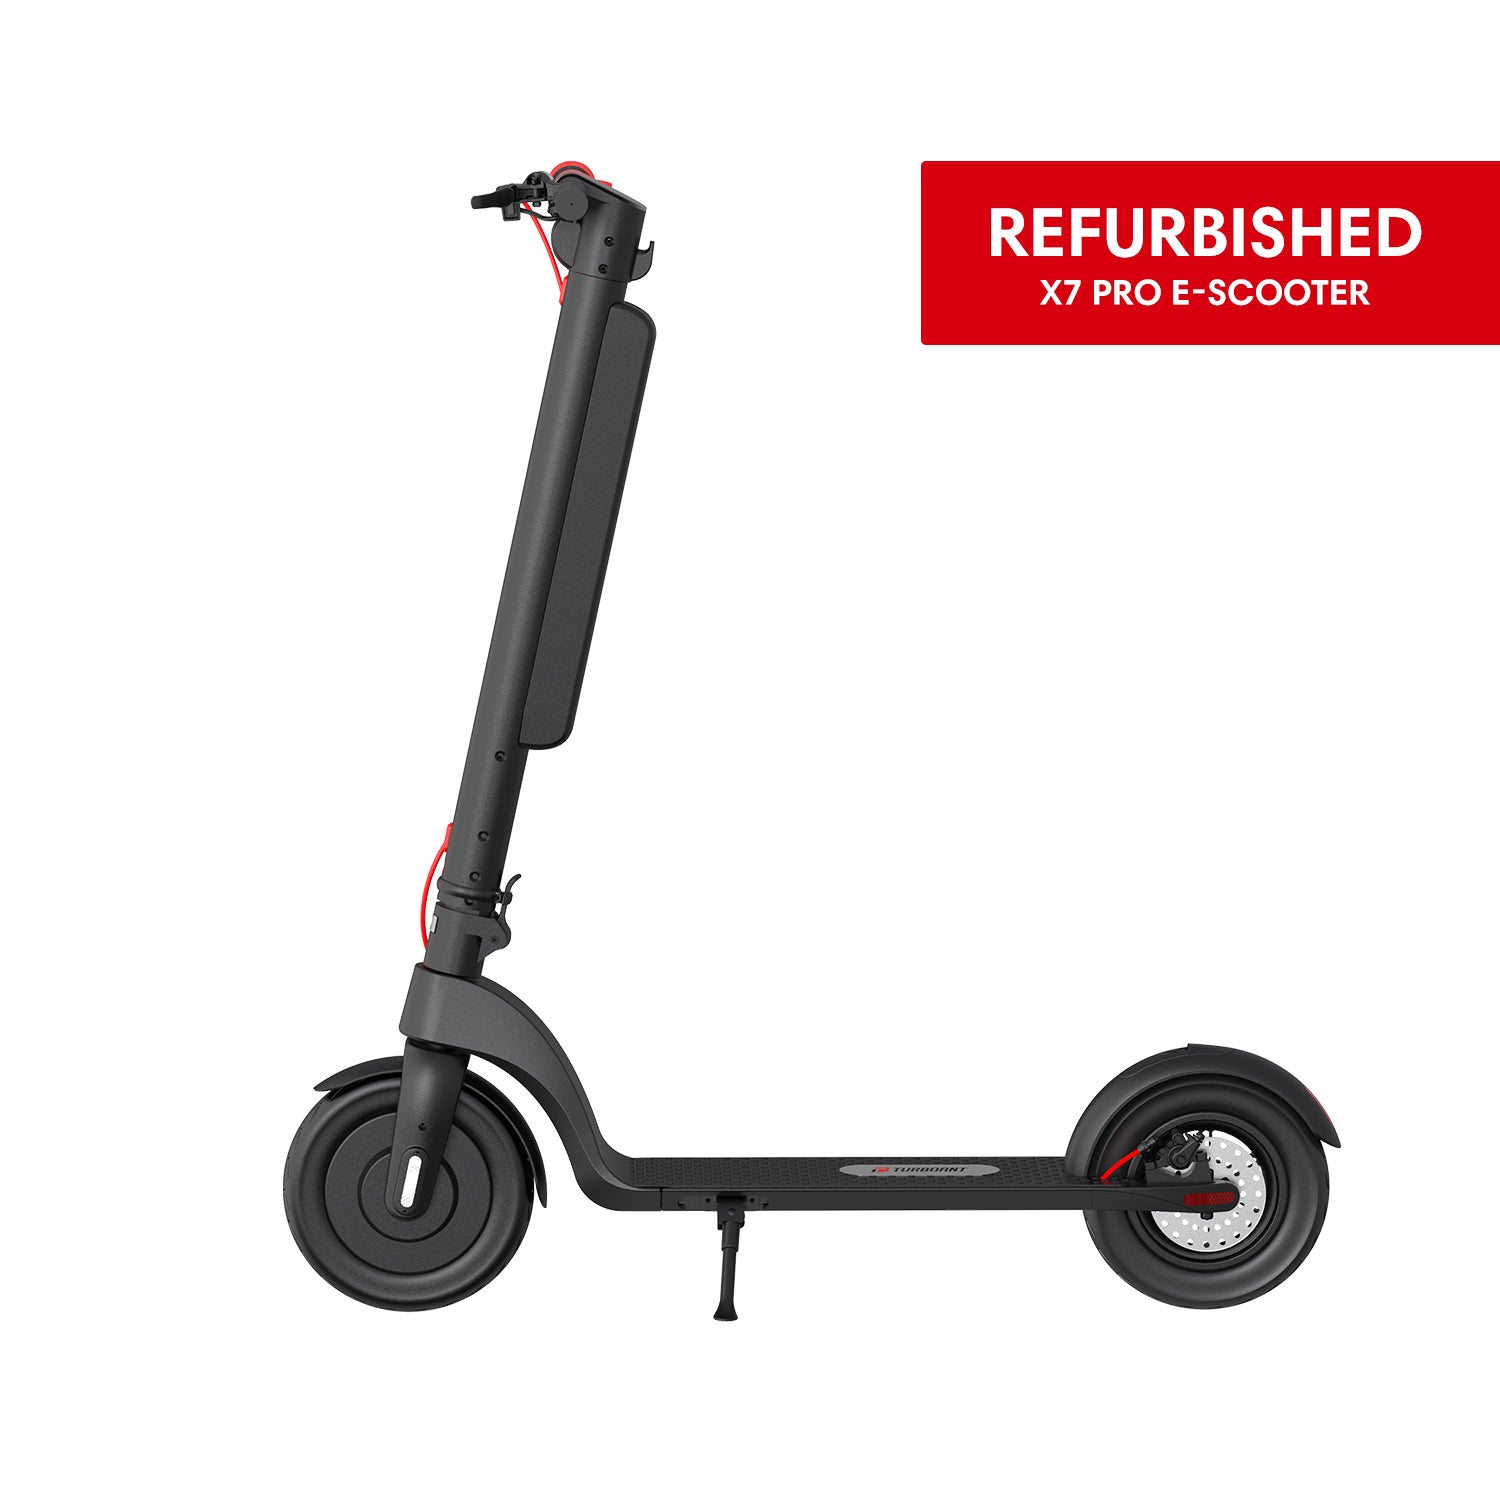 X7 Pro Scooter on Sale | TurboAnt